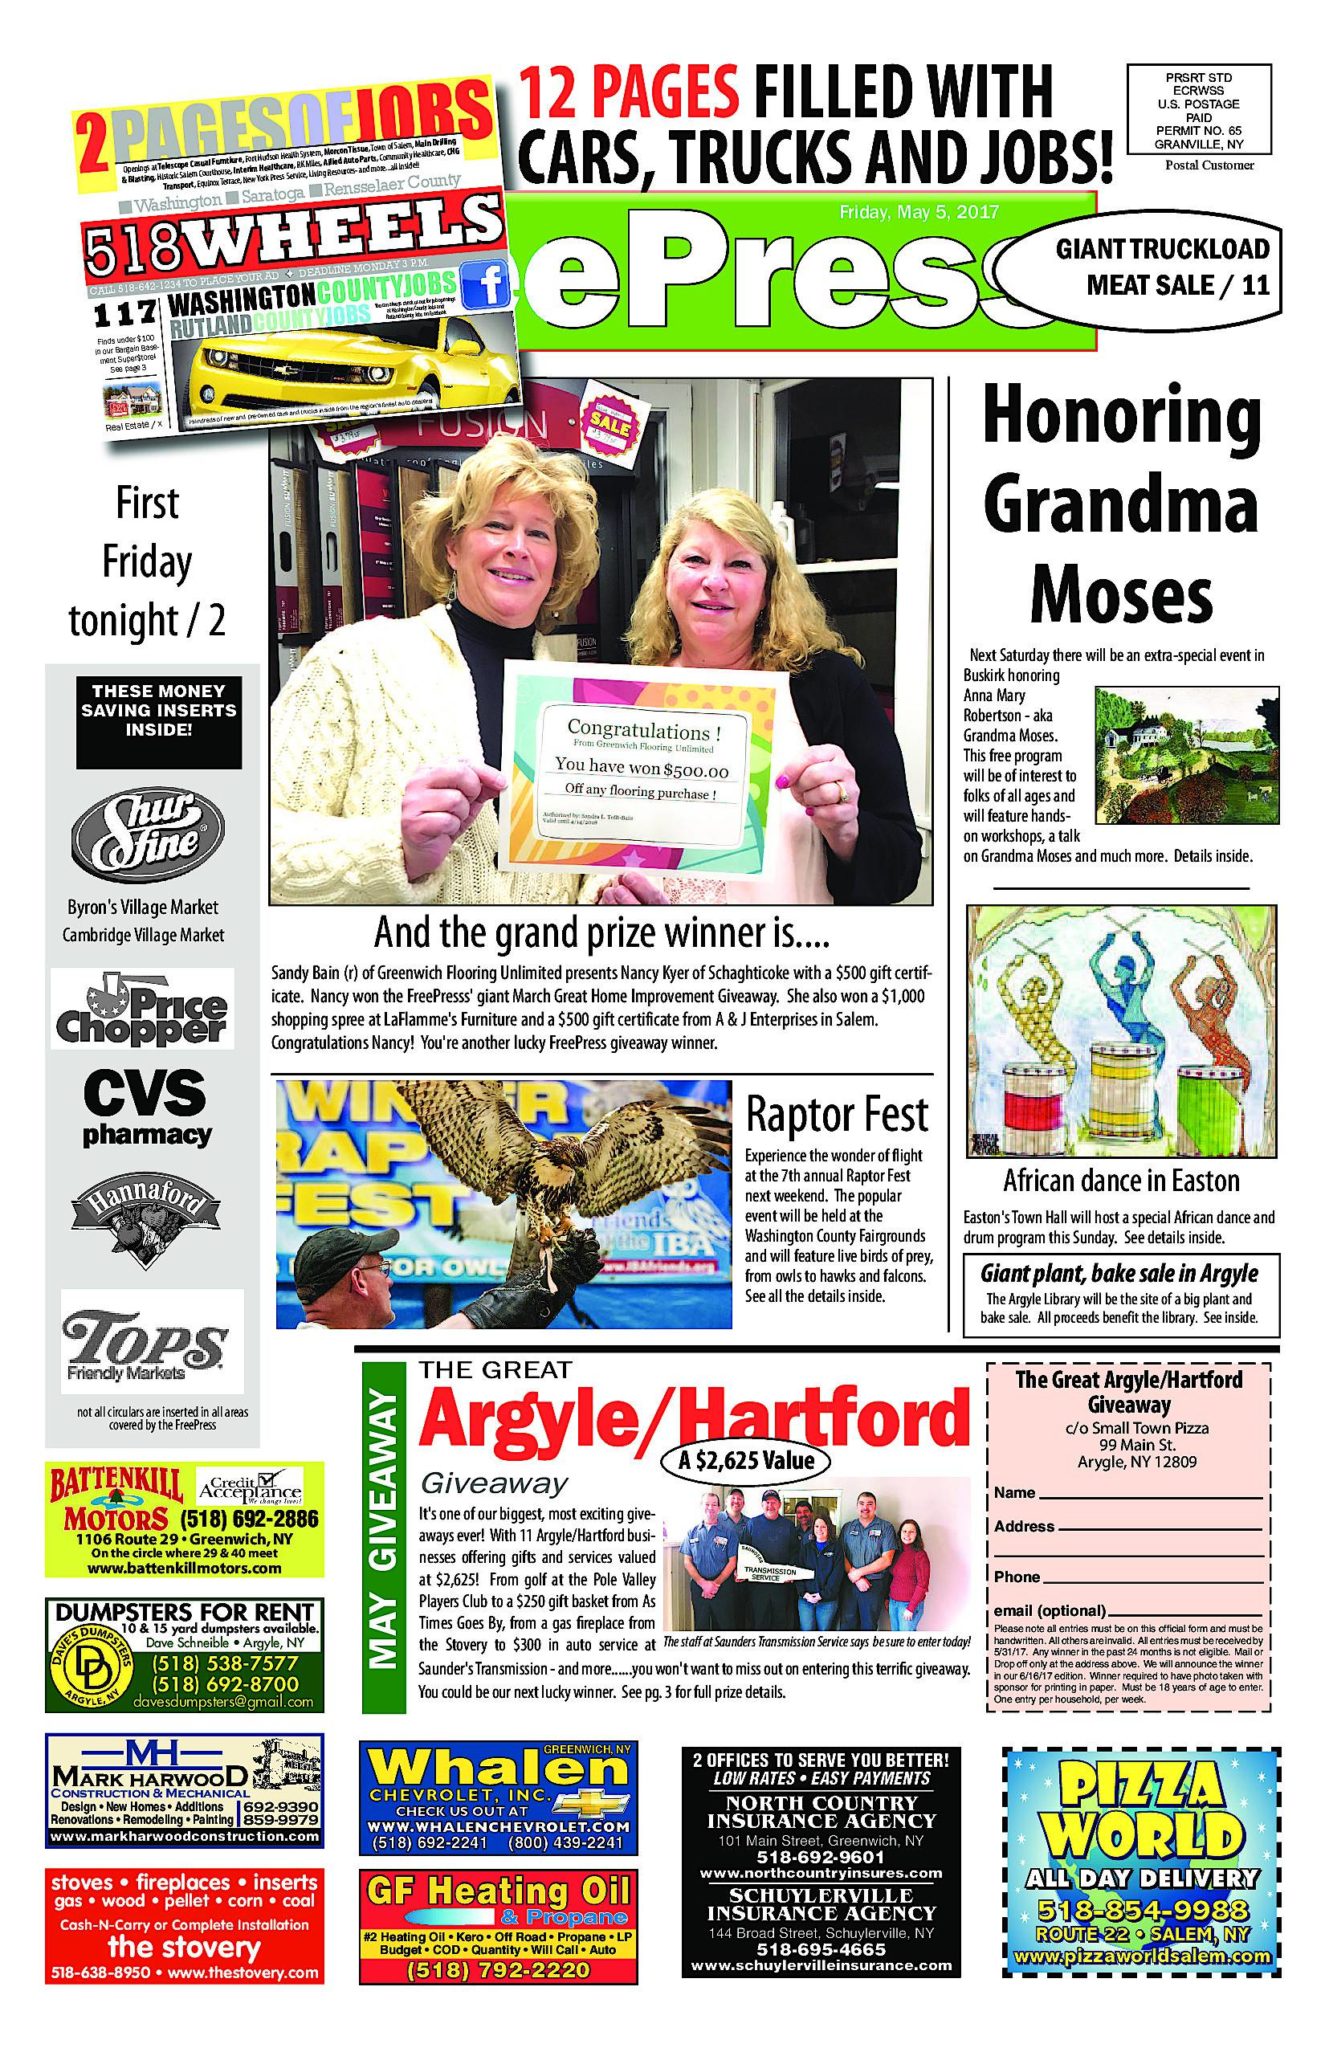 You are currently viewing North Country Freepress – 05/05/17